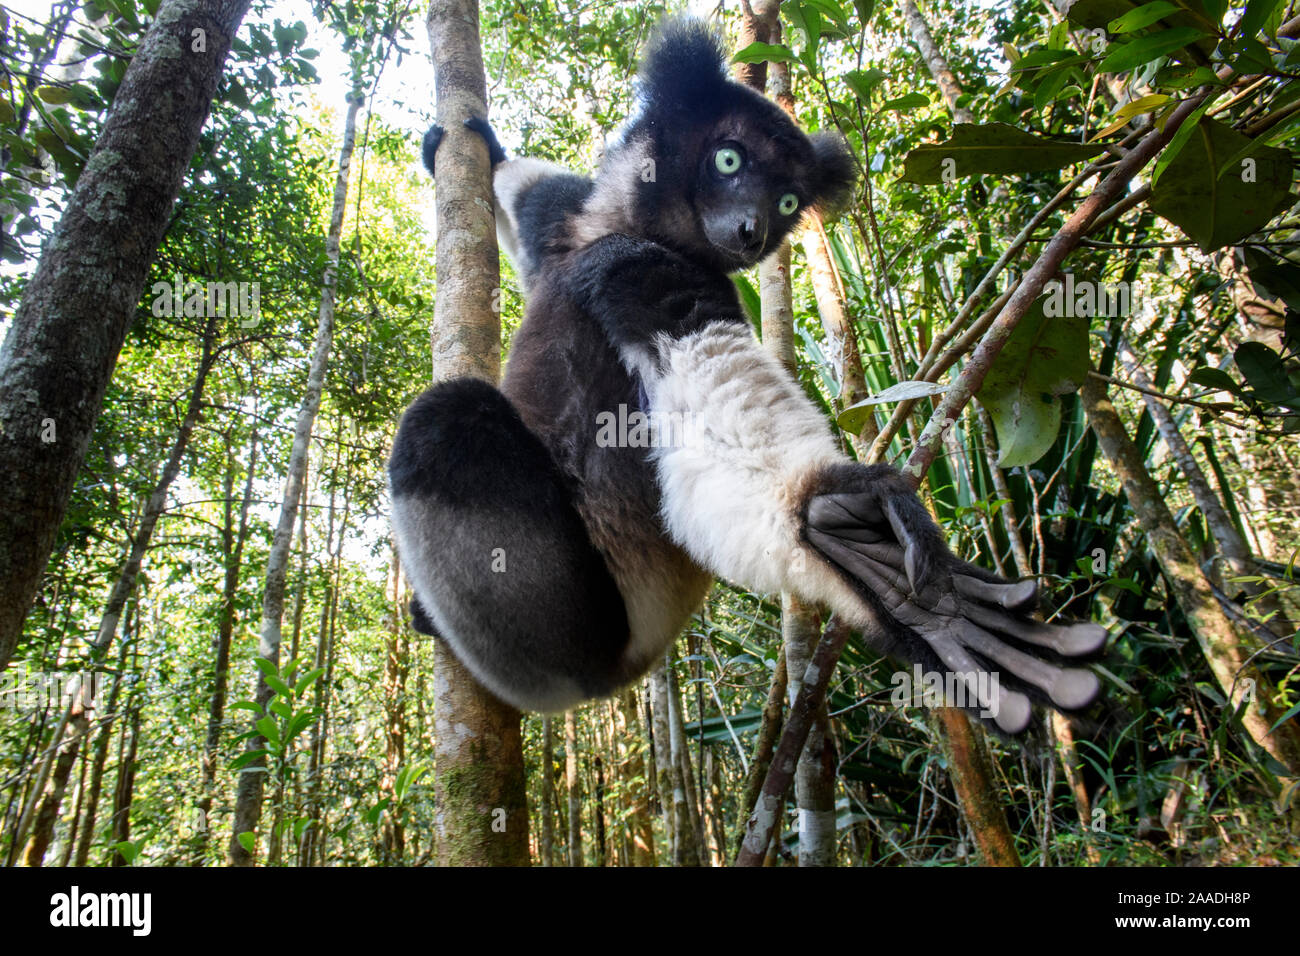 Male Indri (Indri indri) reaching for leaves / foraging in forest understorey. Mitsinjo Reserve, Andasibe-Mantadia National Park, eastern Madagascar. Endangered. Stock Photo